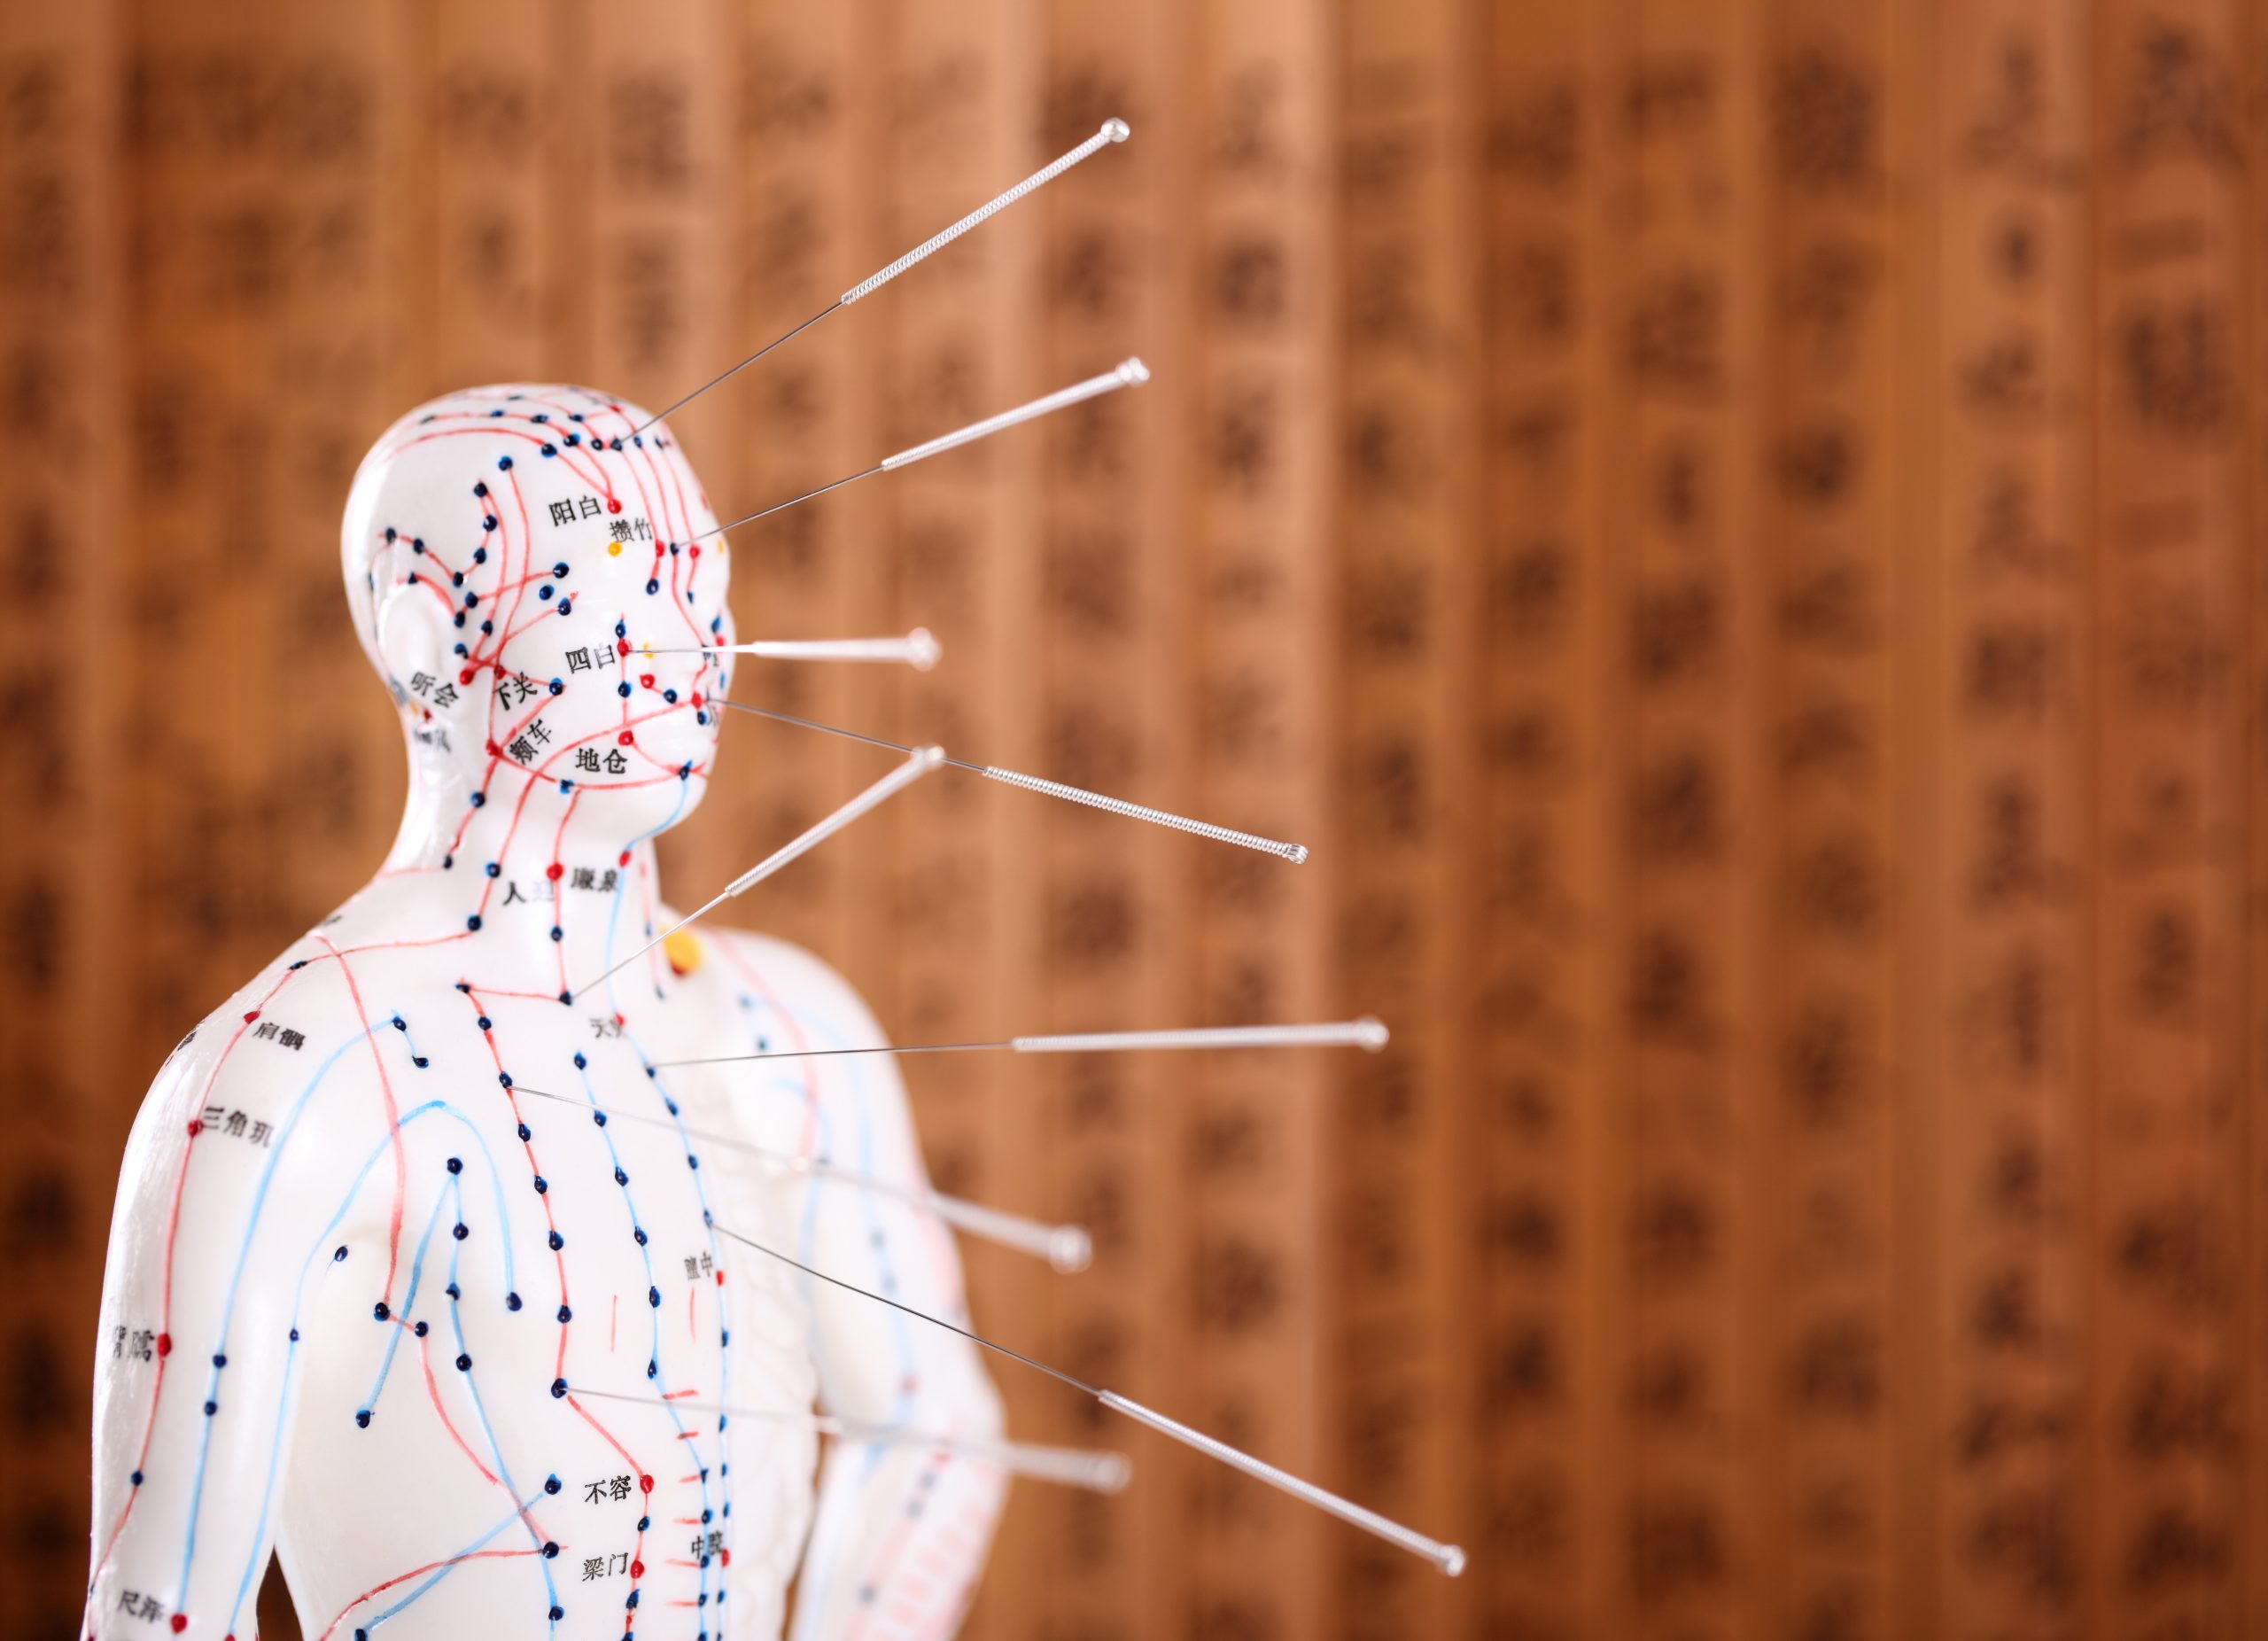 How Does Acupuncture Work Scientifically?